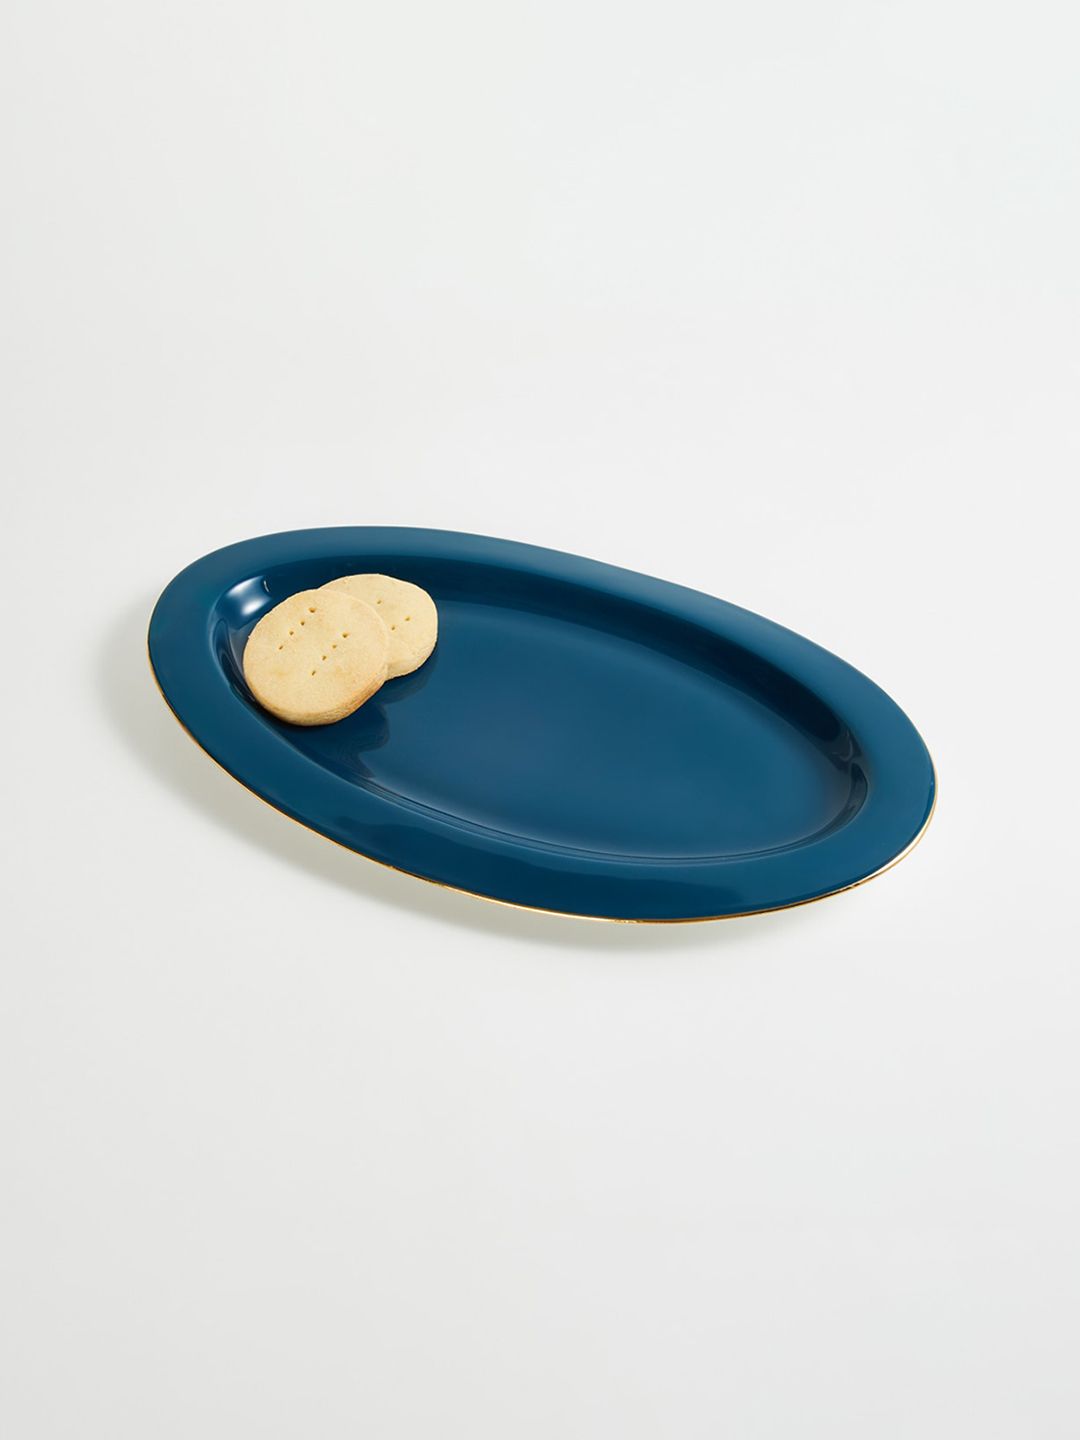 Home Centre Teal-Blue Solid Bone China Serveware Price in India